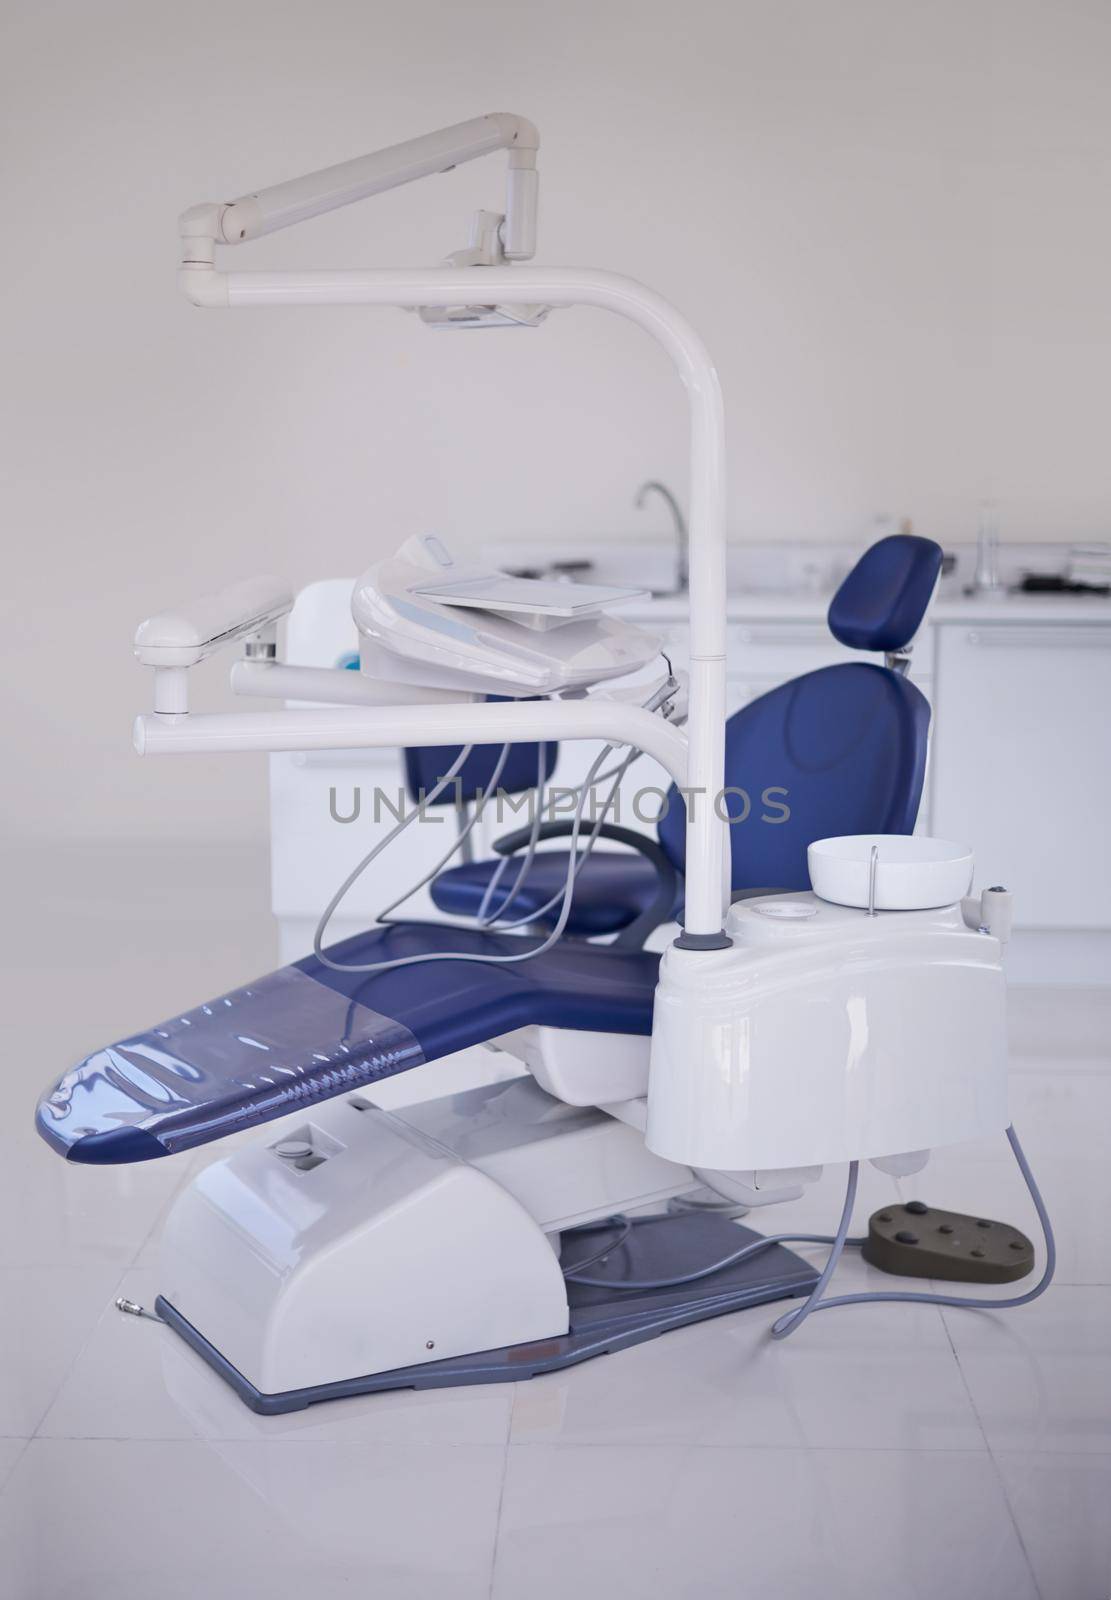 The dreaded dentists chair. A shot of a dental chair and other equipment in a dentists office